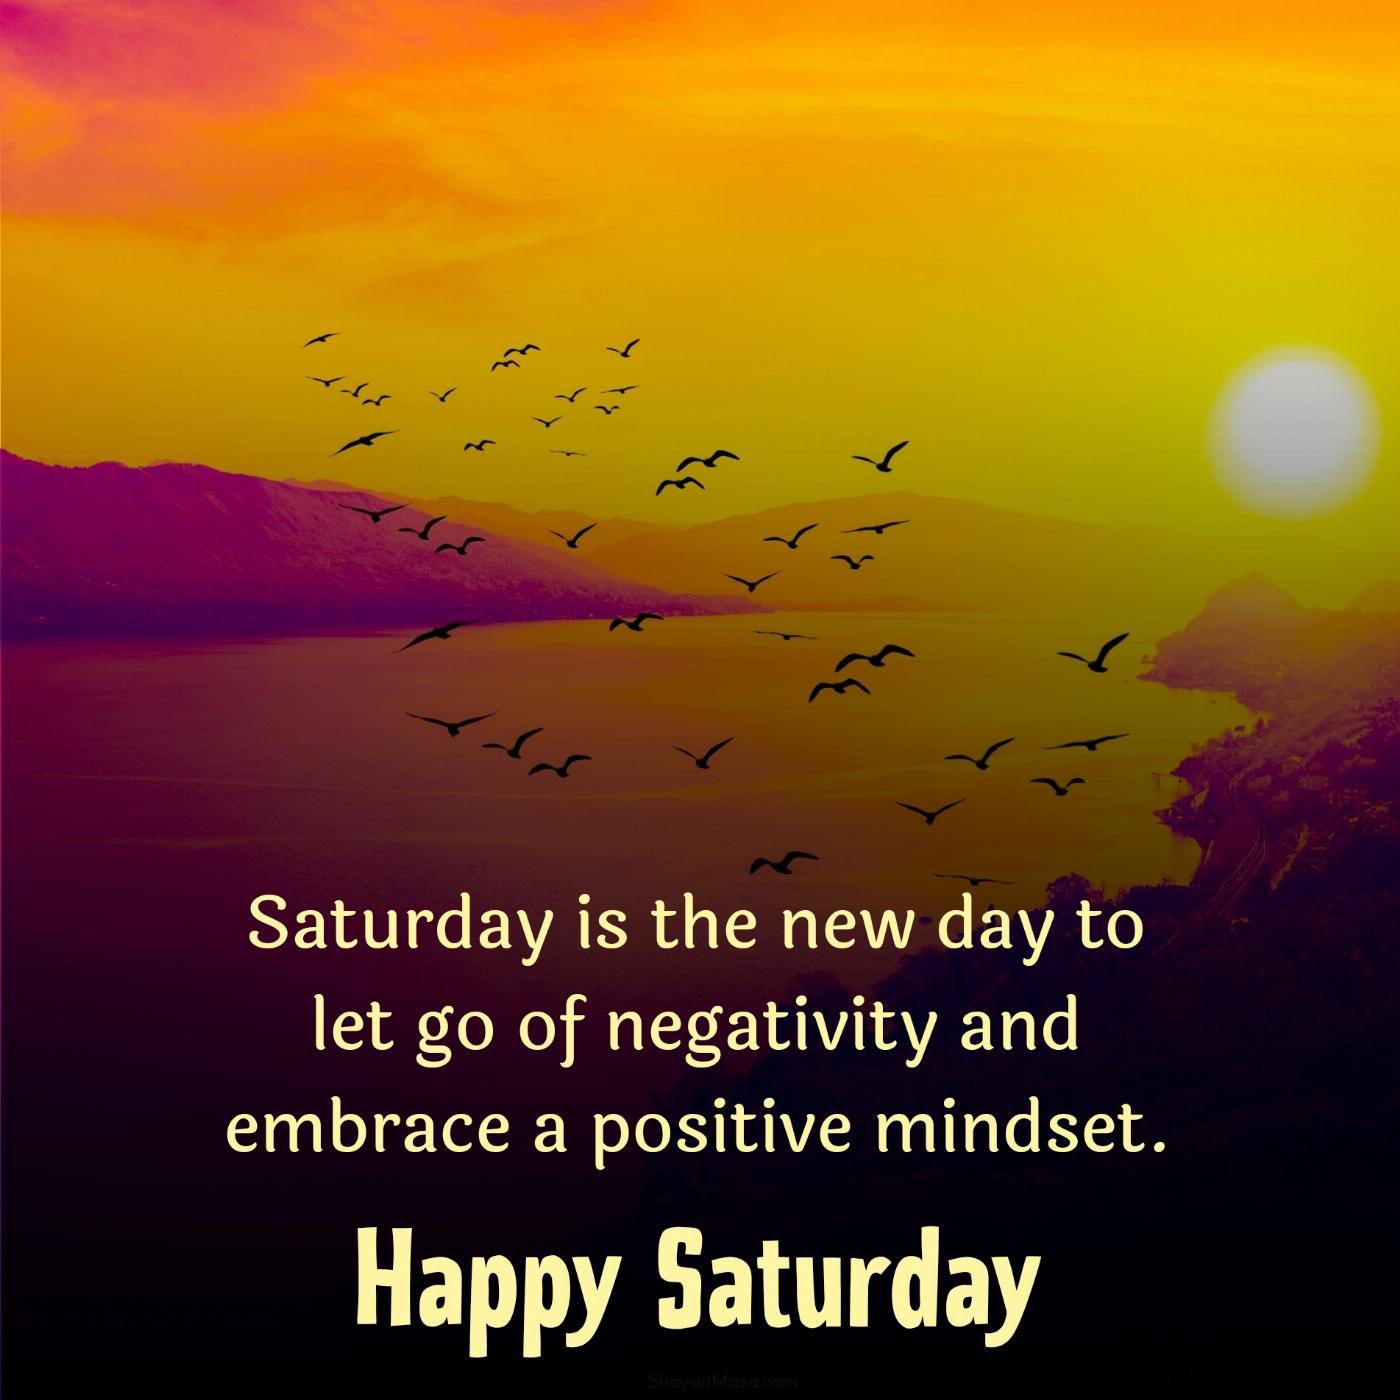 Saturday is the new day to let go of negativity